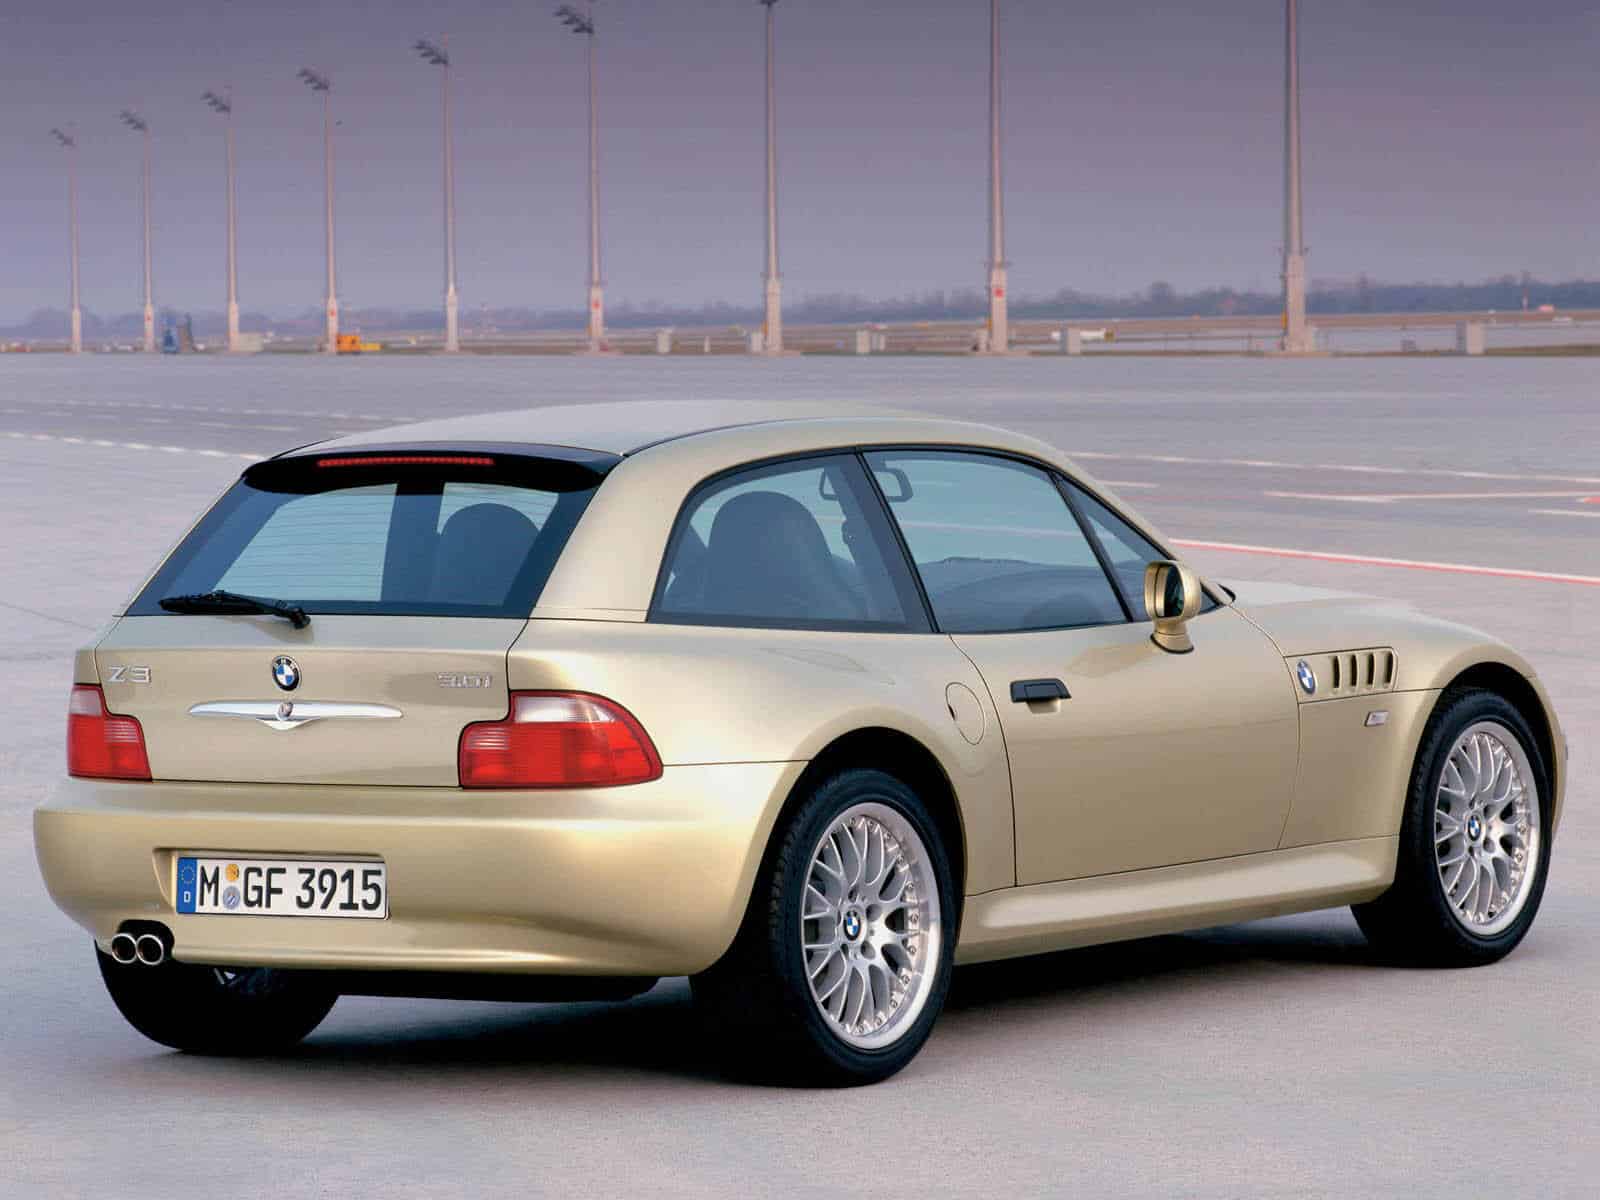 https://www.auto-forever.com/wp-content/uploads/2015/08/Z3_3.0_coupe_2000-2002_2.jpg